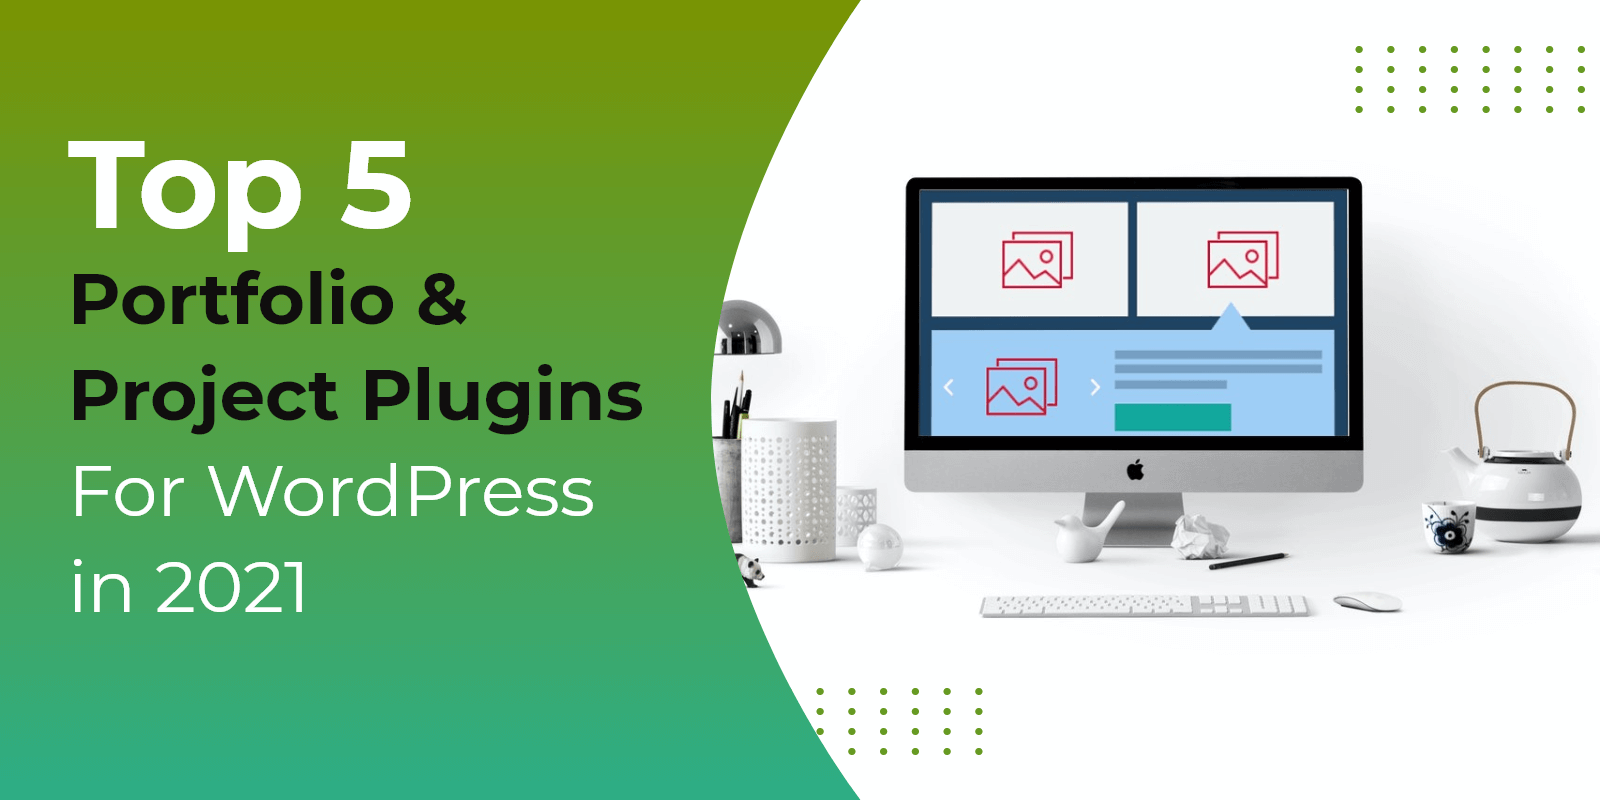 Top 5 Portfolio and Project Plugins For WordPress in 2021